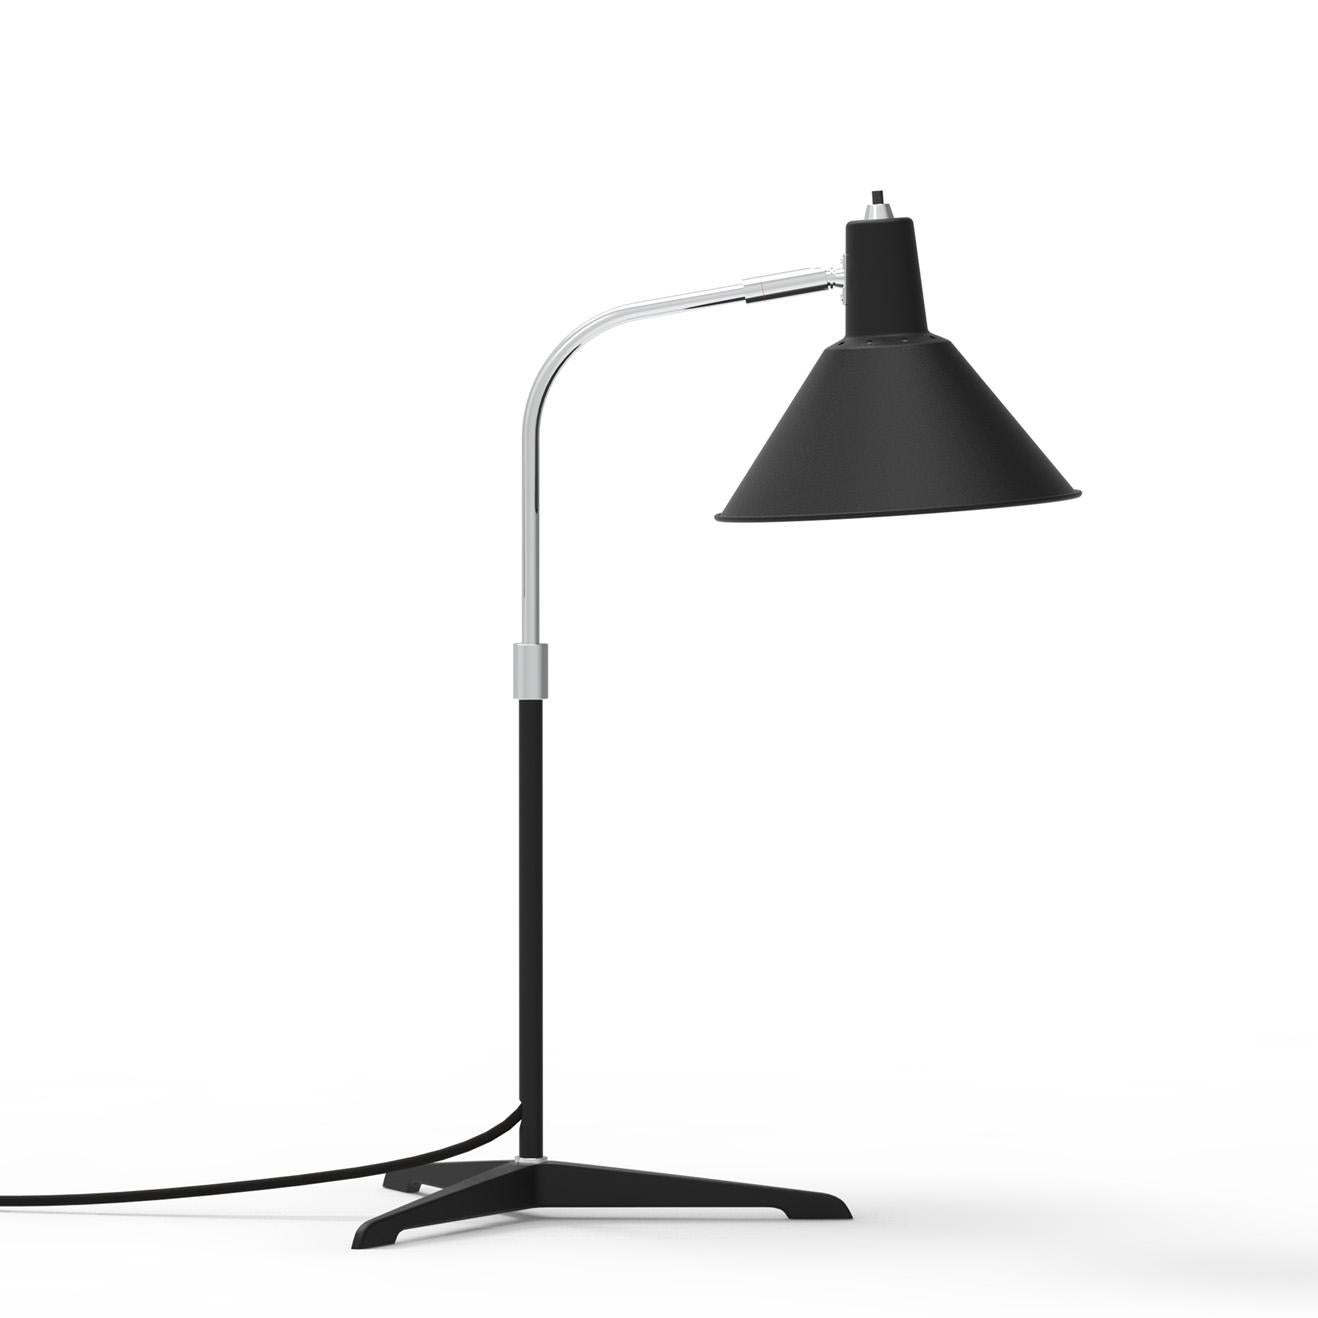 Chinese Arcon Table Lamp in Black/Chrome - By NUAD For Sale